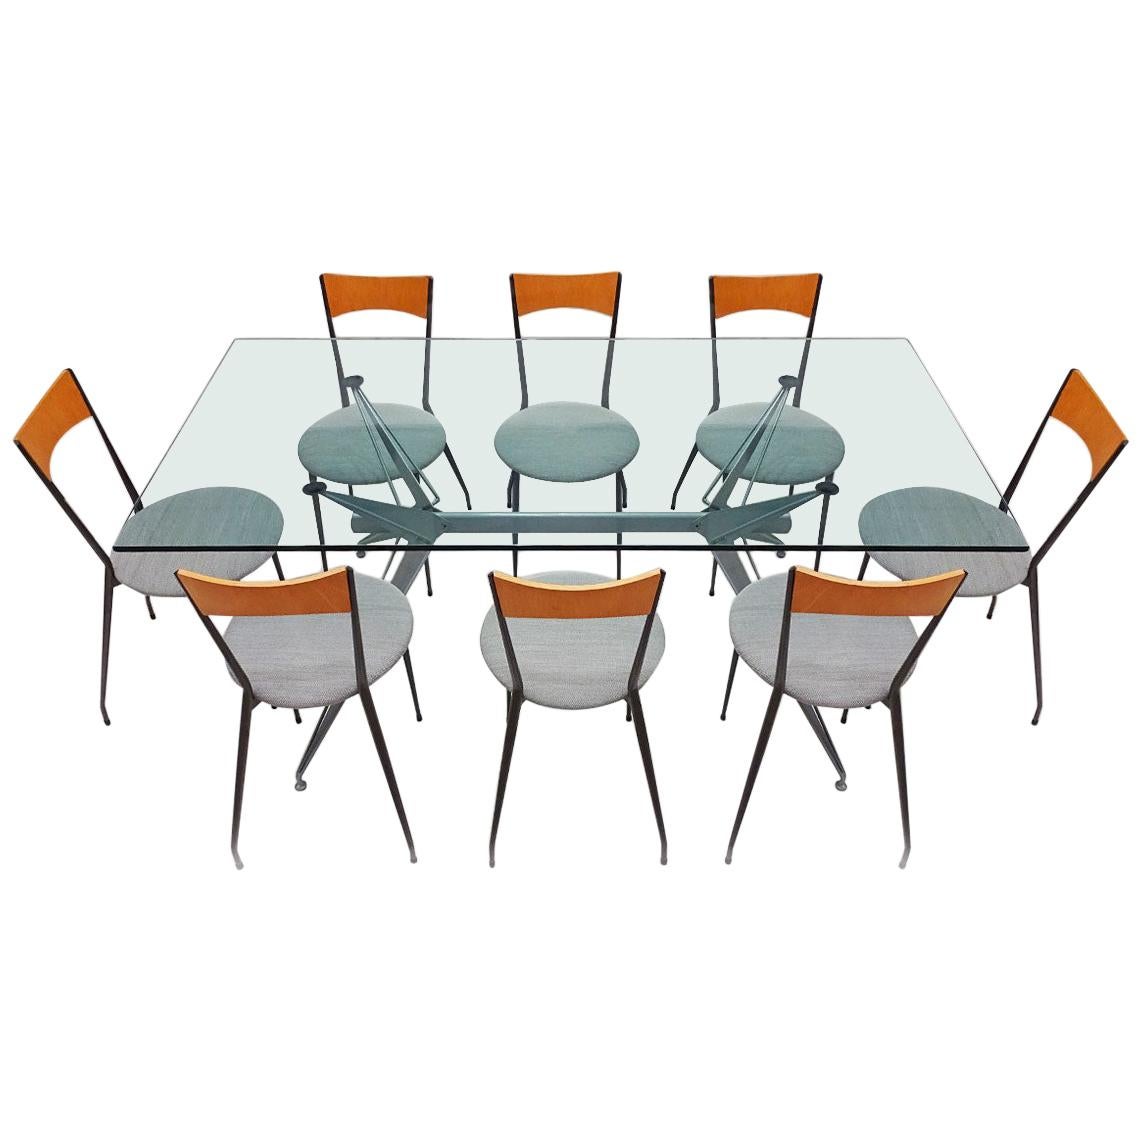 This is a Classic dining set that was sold in the Conran flagship store in London throughout the late 1980s and 1990s.

The set comprises a Fasem Italian metal and glass table with an angular design that is matched to a set of 8 metal, fabric and